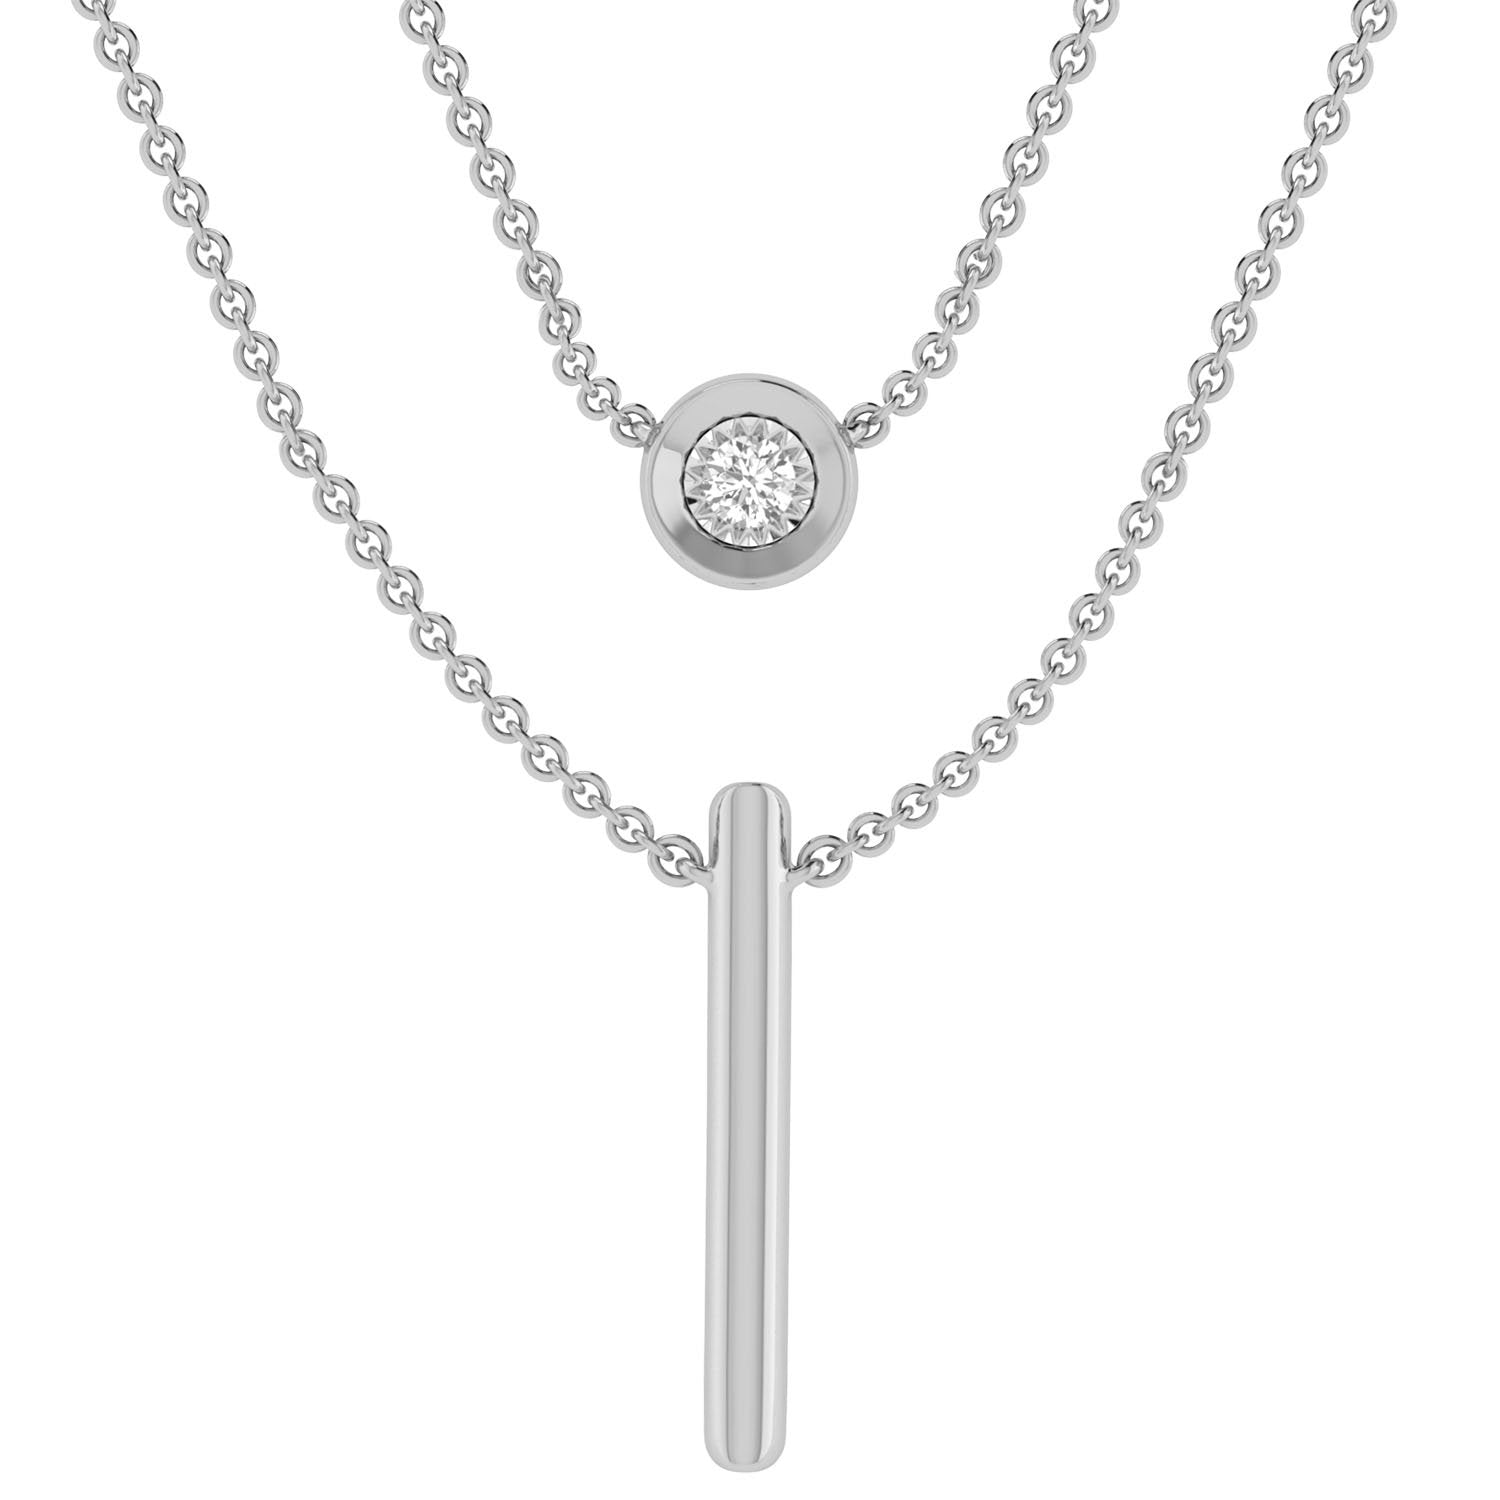 9ct White Gold 0.10ct Diamond Double Layer Necklace